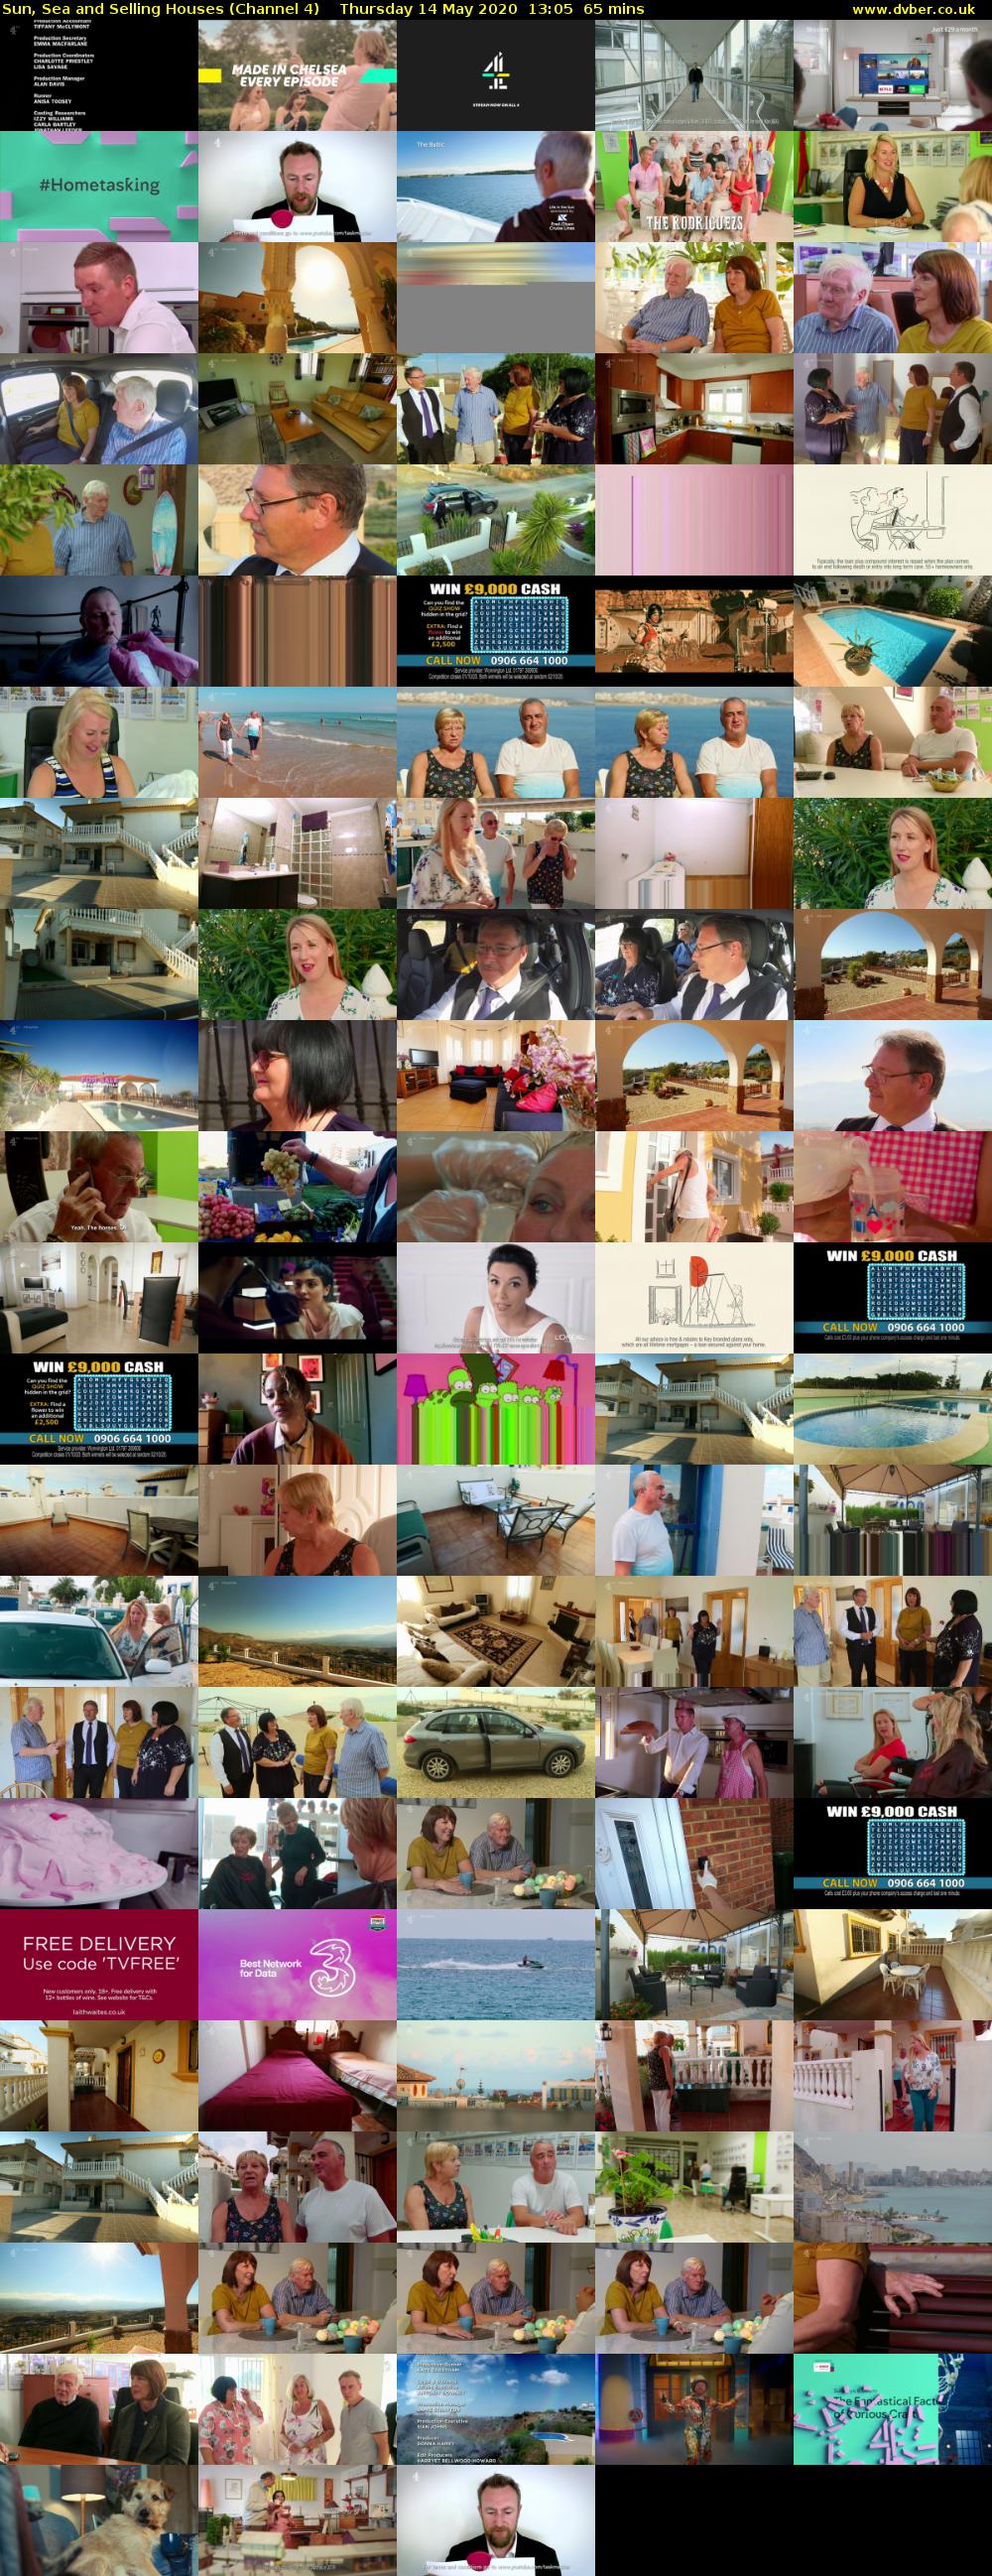 Sun, Sea and Selling Houses (Channel 4) Thursday 14 May 2020 13:05 - 14:10